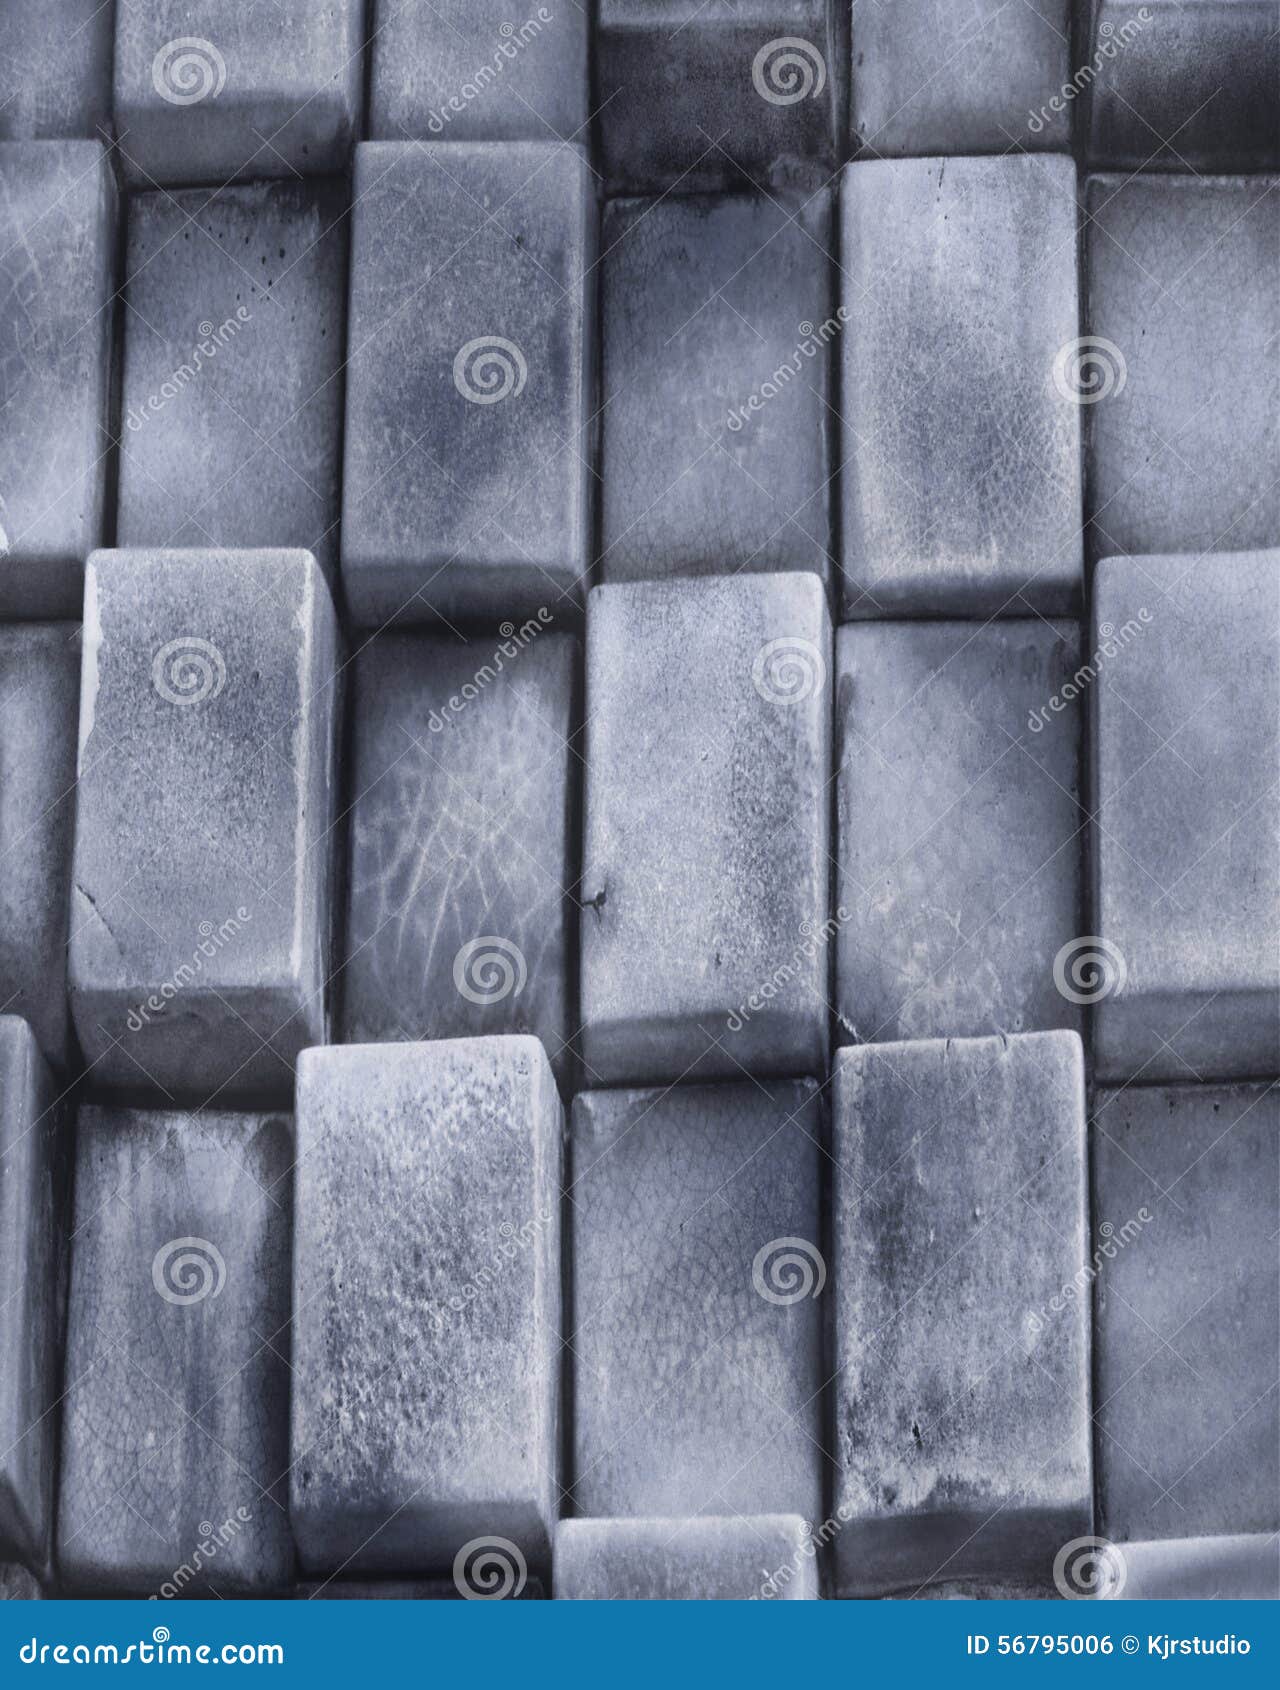 3d computer brick abstract background